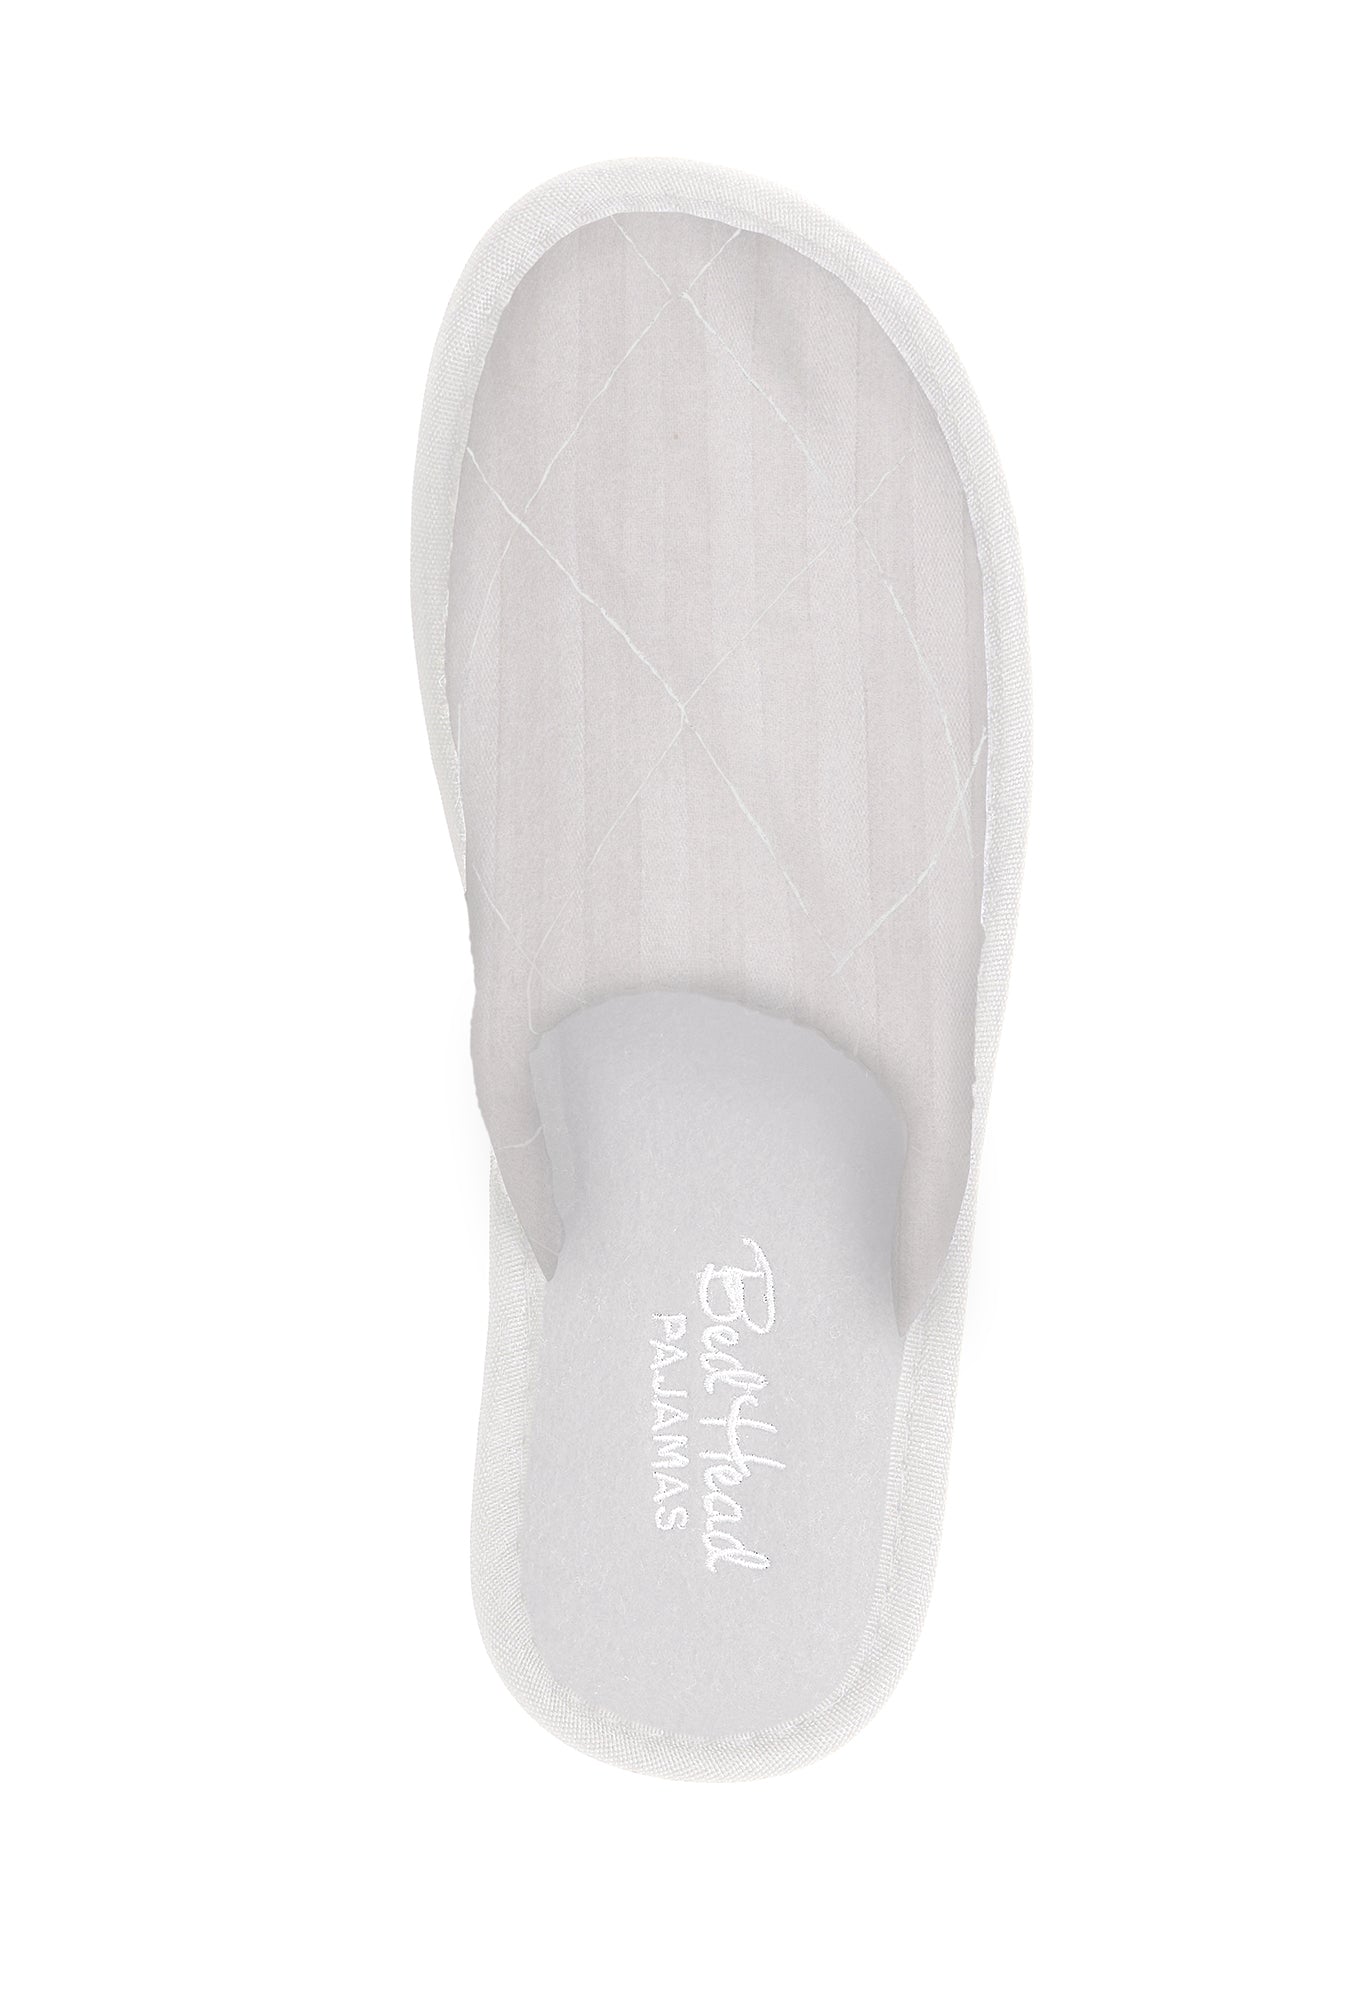 BEDHEAD WHITE 3D STRIPE FRENCH TERRY LINED WOVEN COTTON UNISEX SLIPPERS